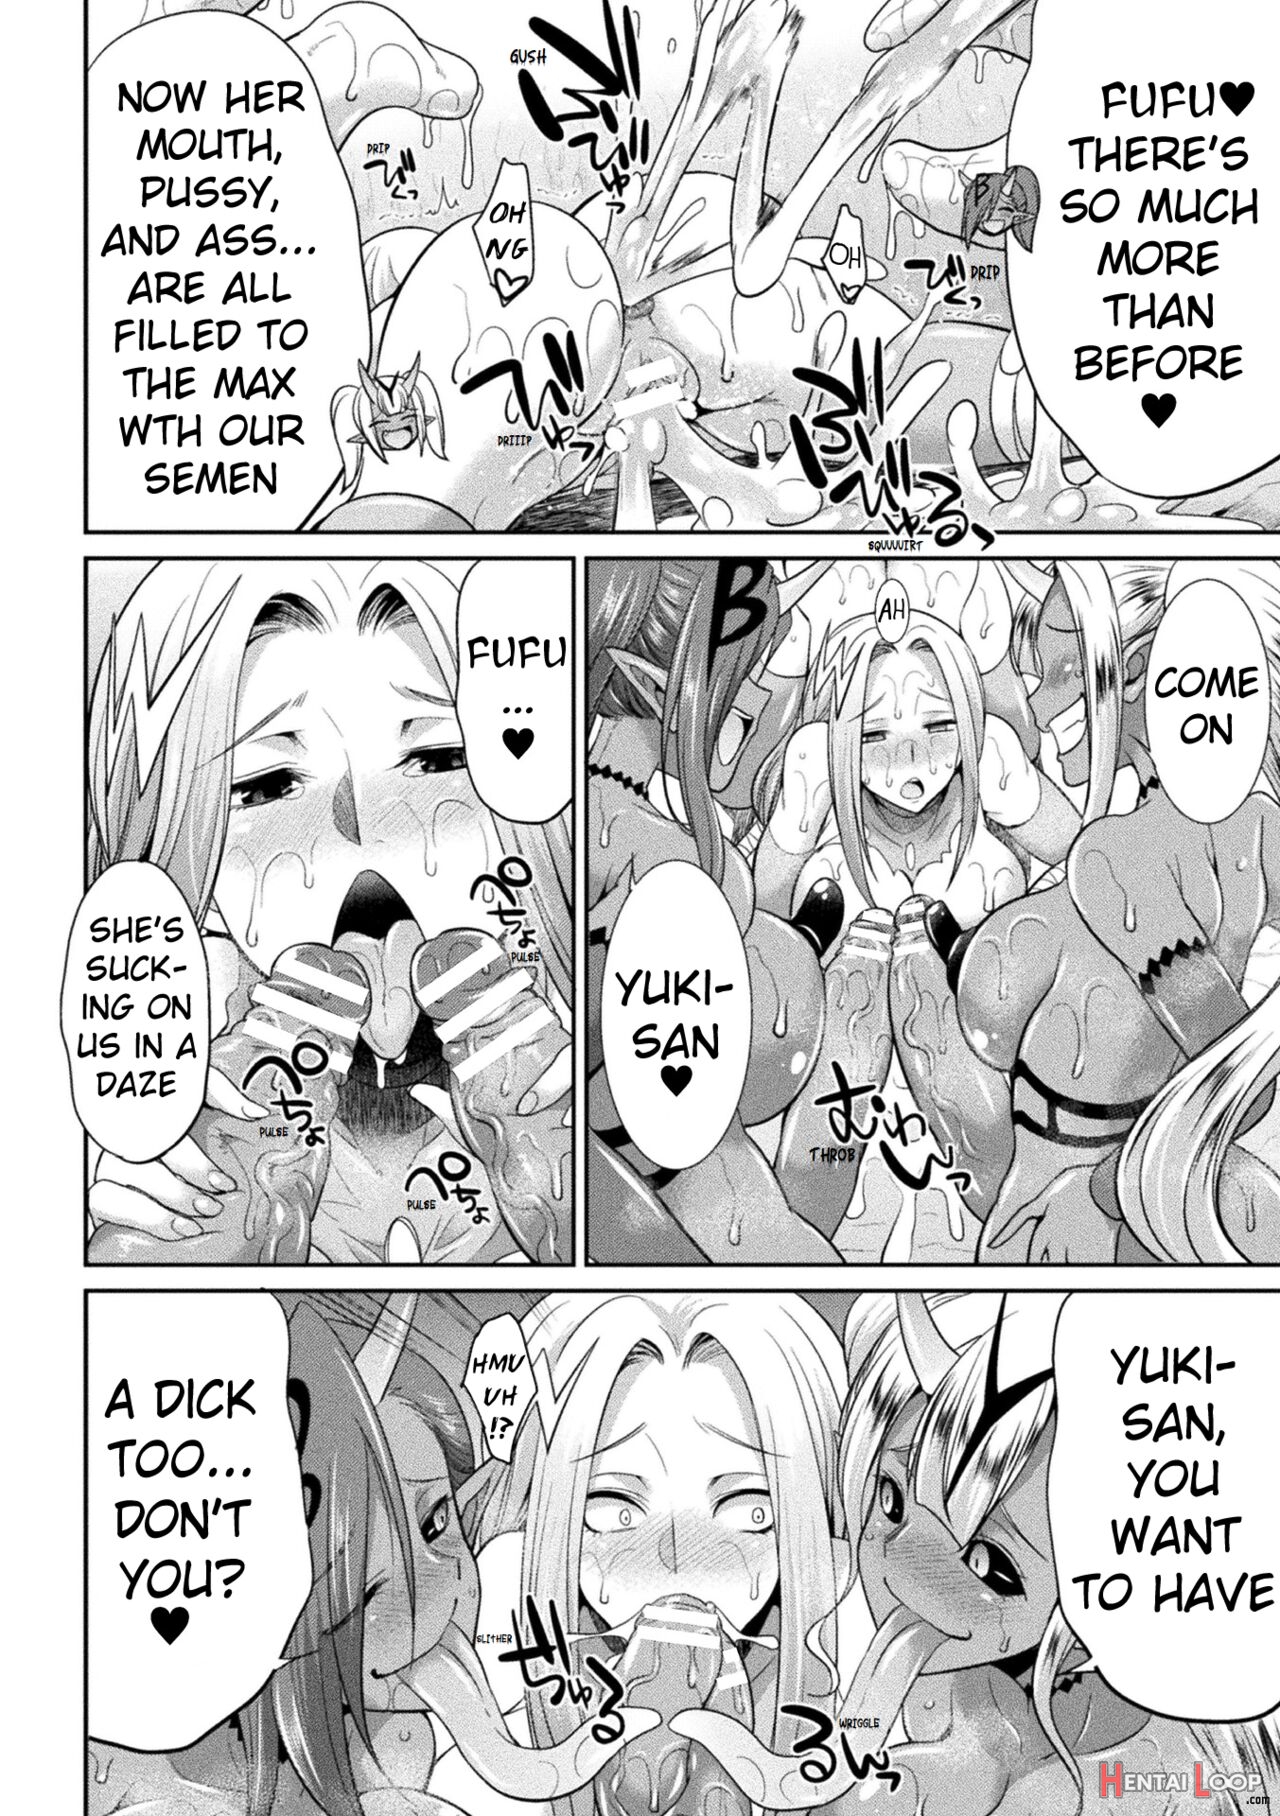 Special Duty Squadron Colorful Force Heroines Of Justice Vs The Tentacle Queen! The Great Battle Of Futa Training!? page 114